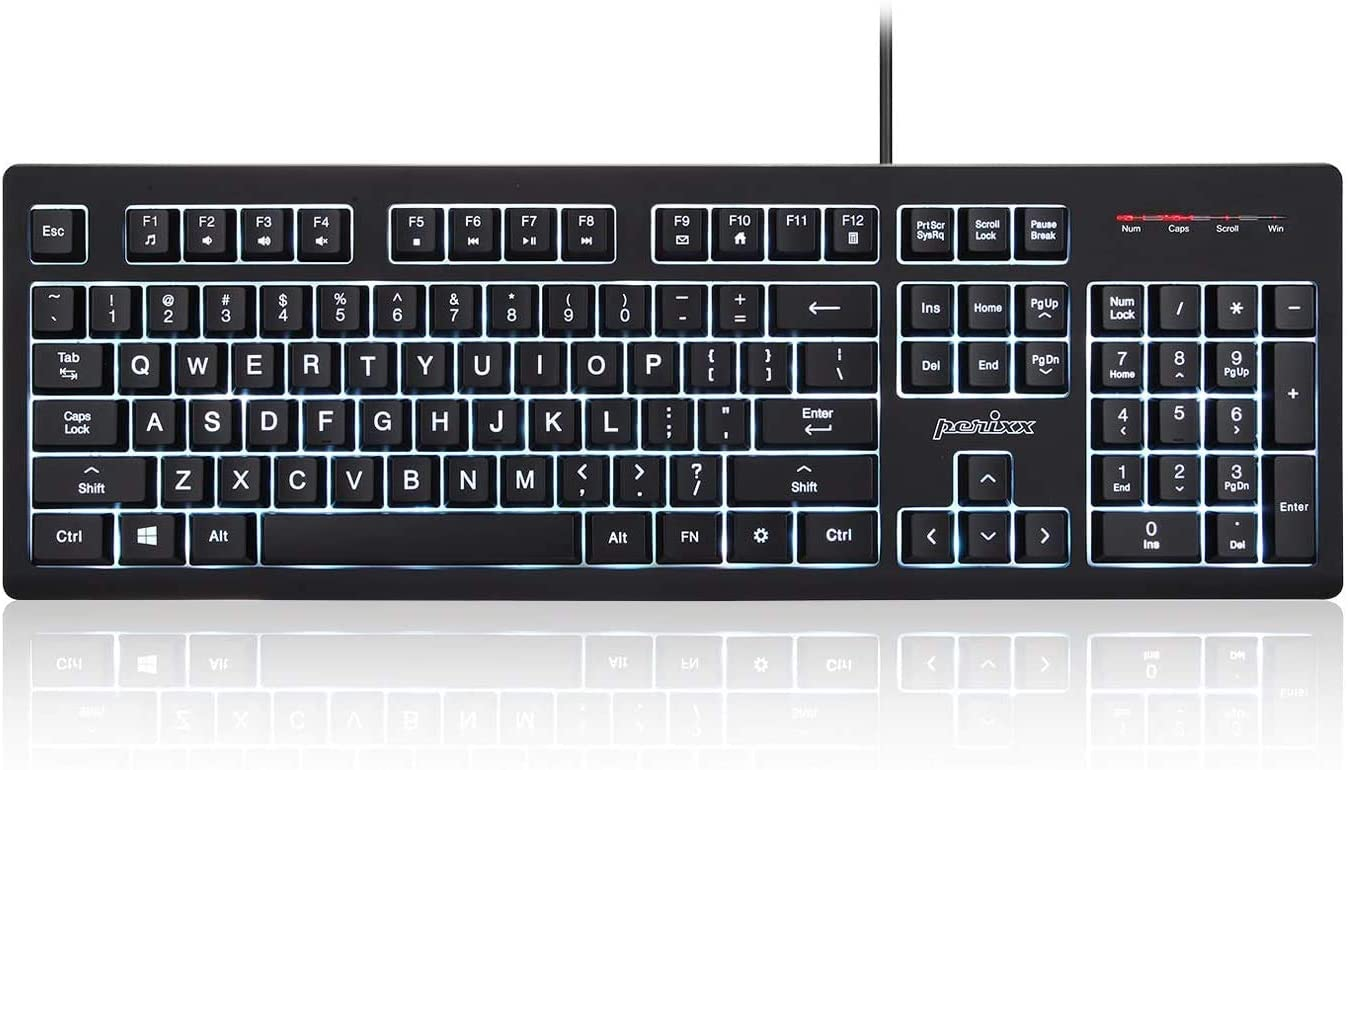 Perixx PERIBOARD-329 Wired USB Backlit Keyboard, Big Print Letter with 7-Color Illuminated LED, X Type High Scissor Keys, Black, US English Layout (11663)